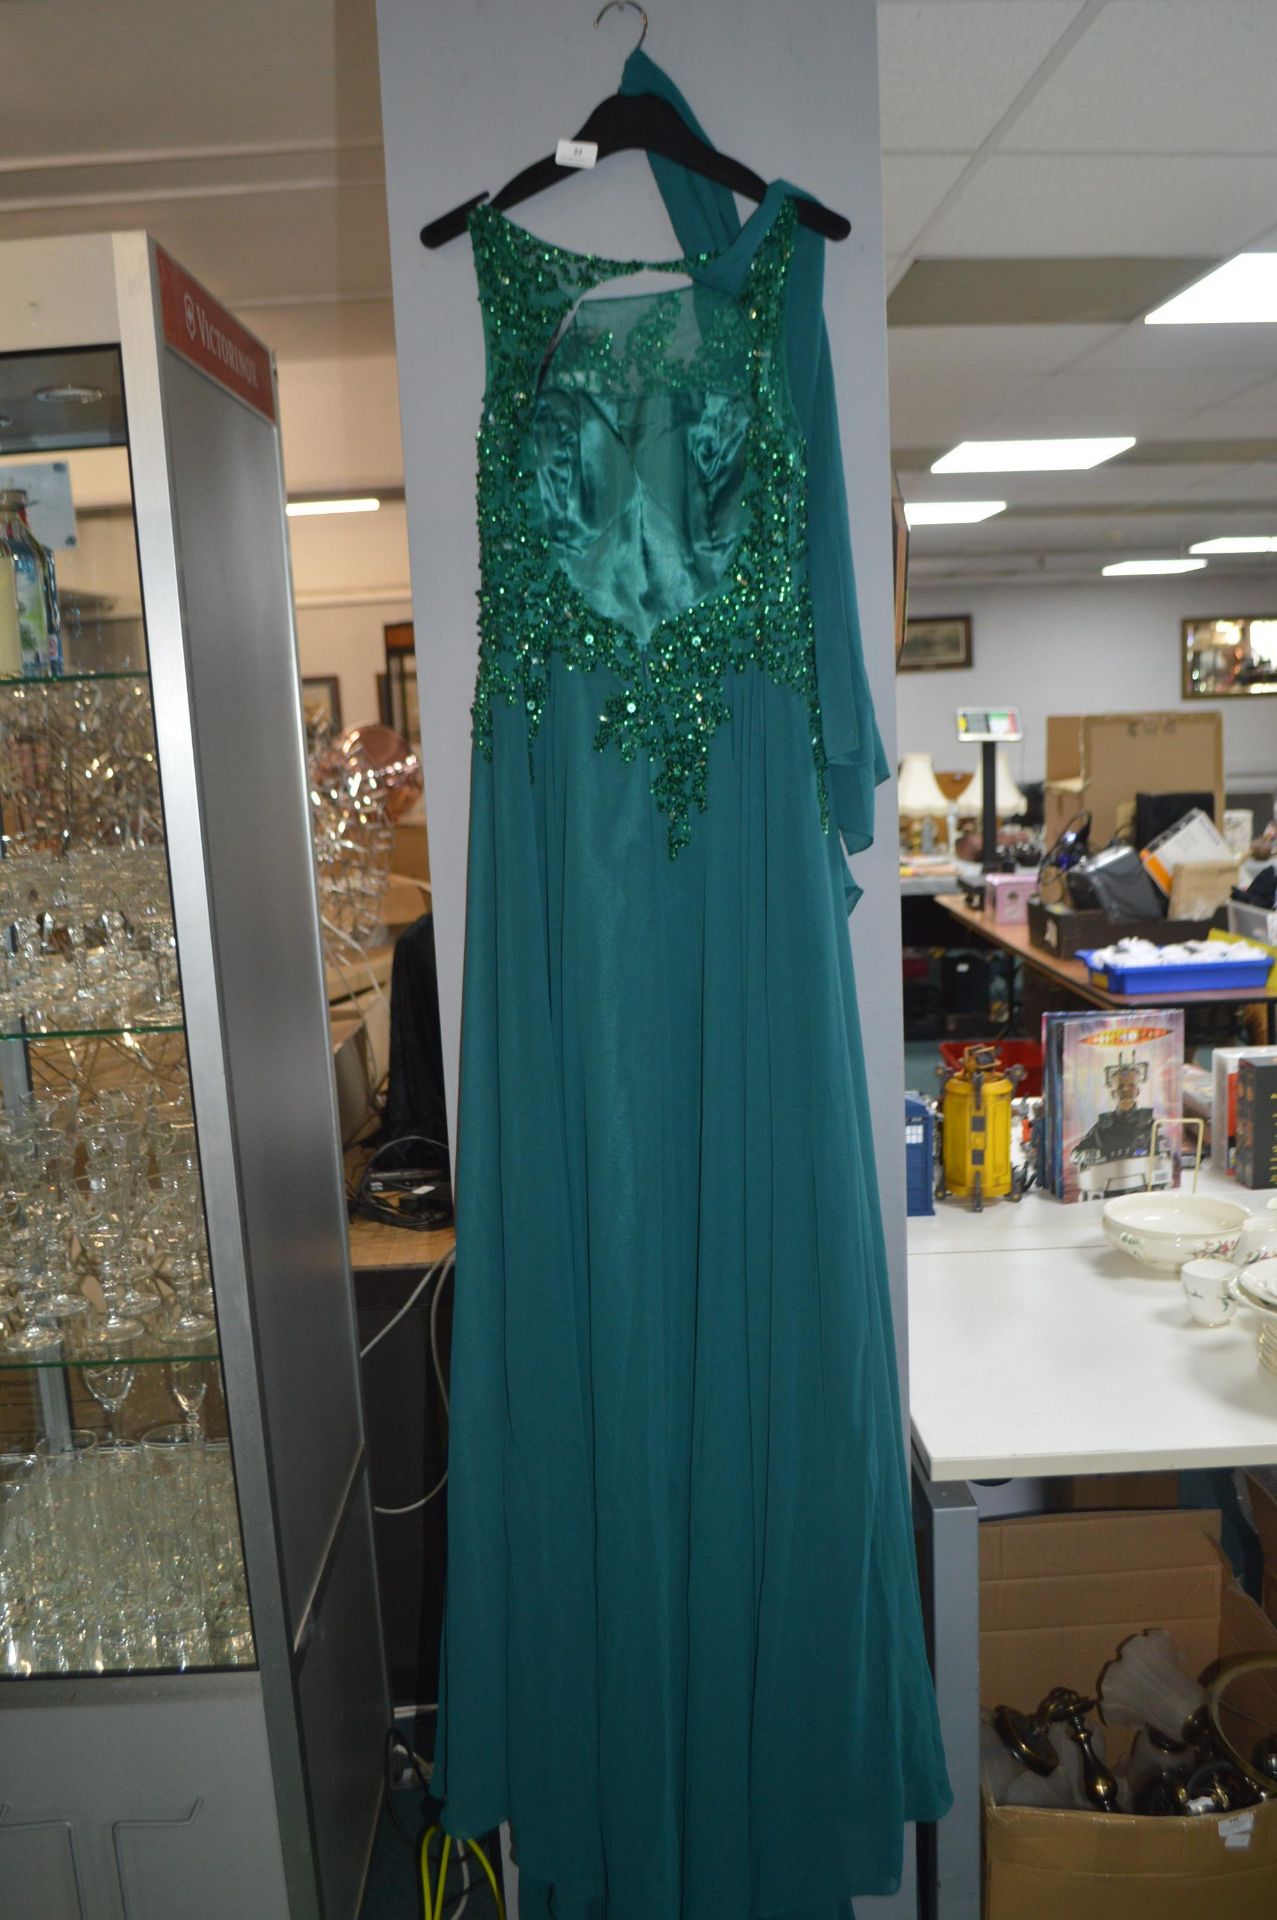 Prom Dress by Christian Koehlert in Posy Green Size: 12 - Image 2 of 2